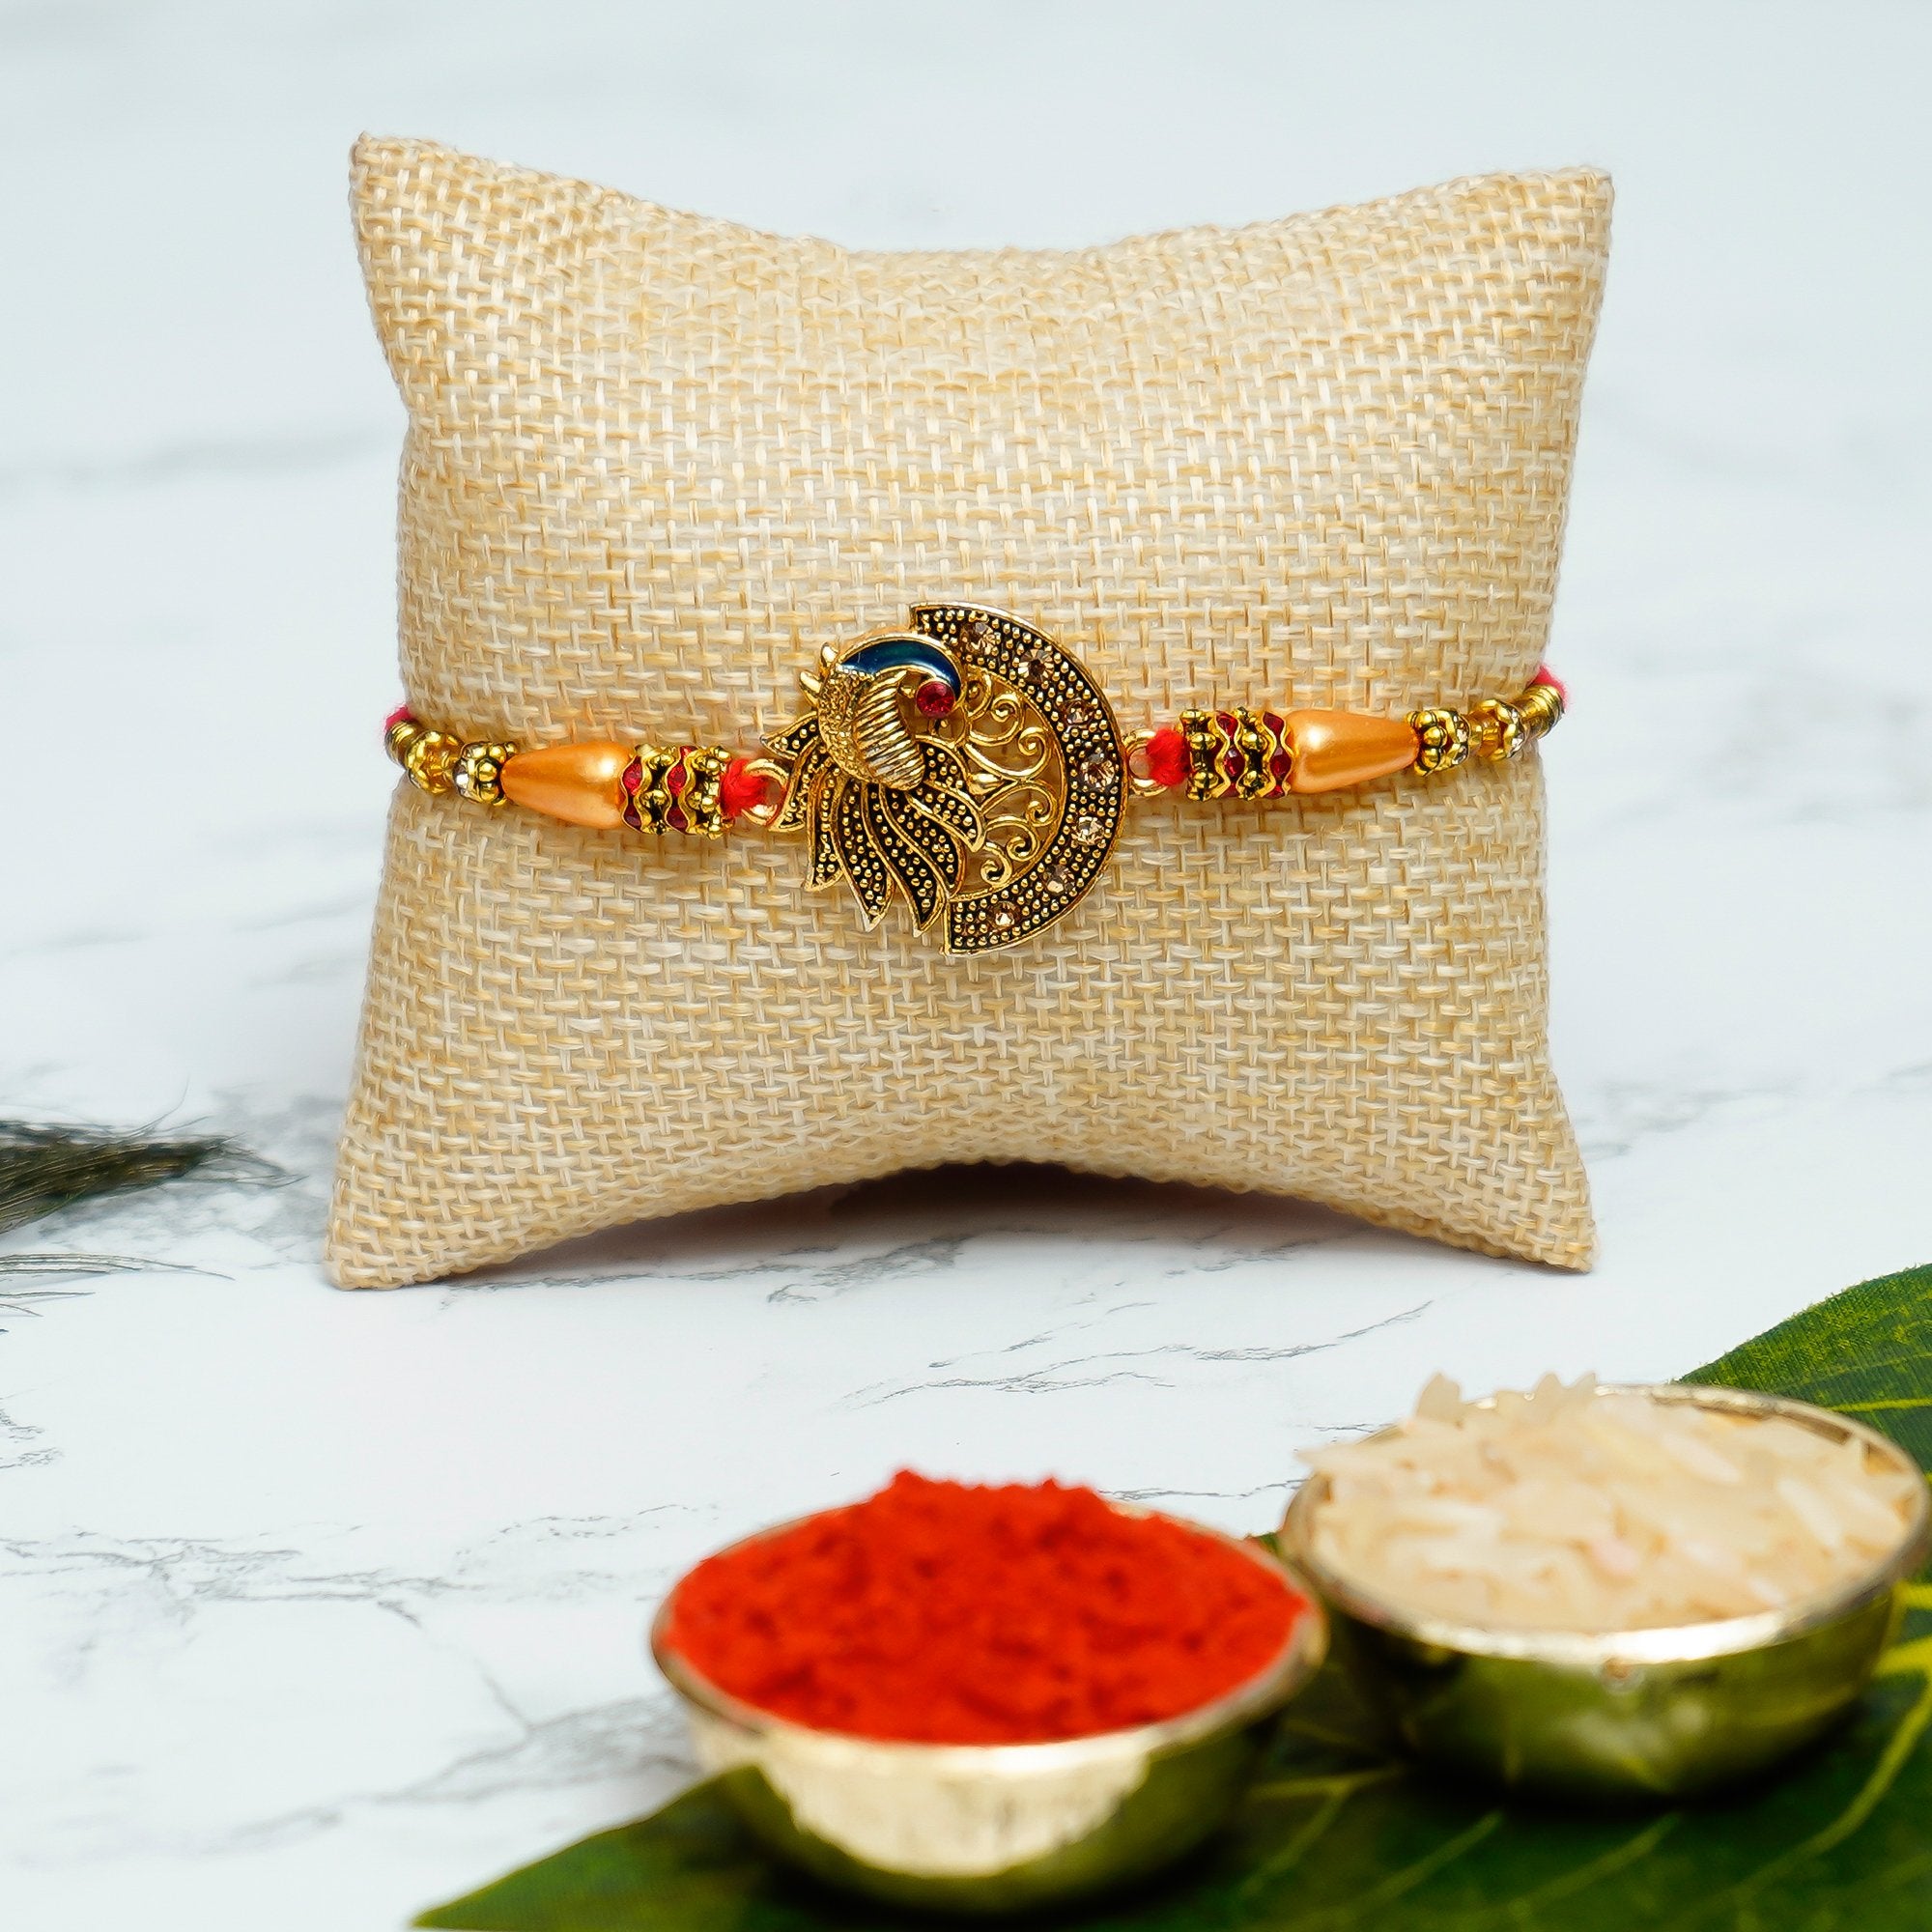 Designer Peacock Rakhi with Brass Ganesha Carrying Happiness around the world Antique Showpiece and Roli Chawal Pack, Best Wishes Greeting Card 1